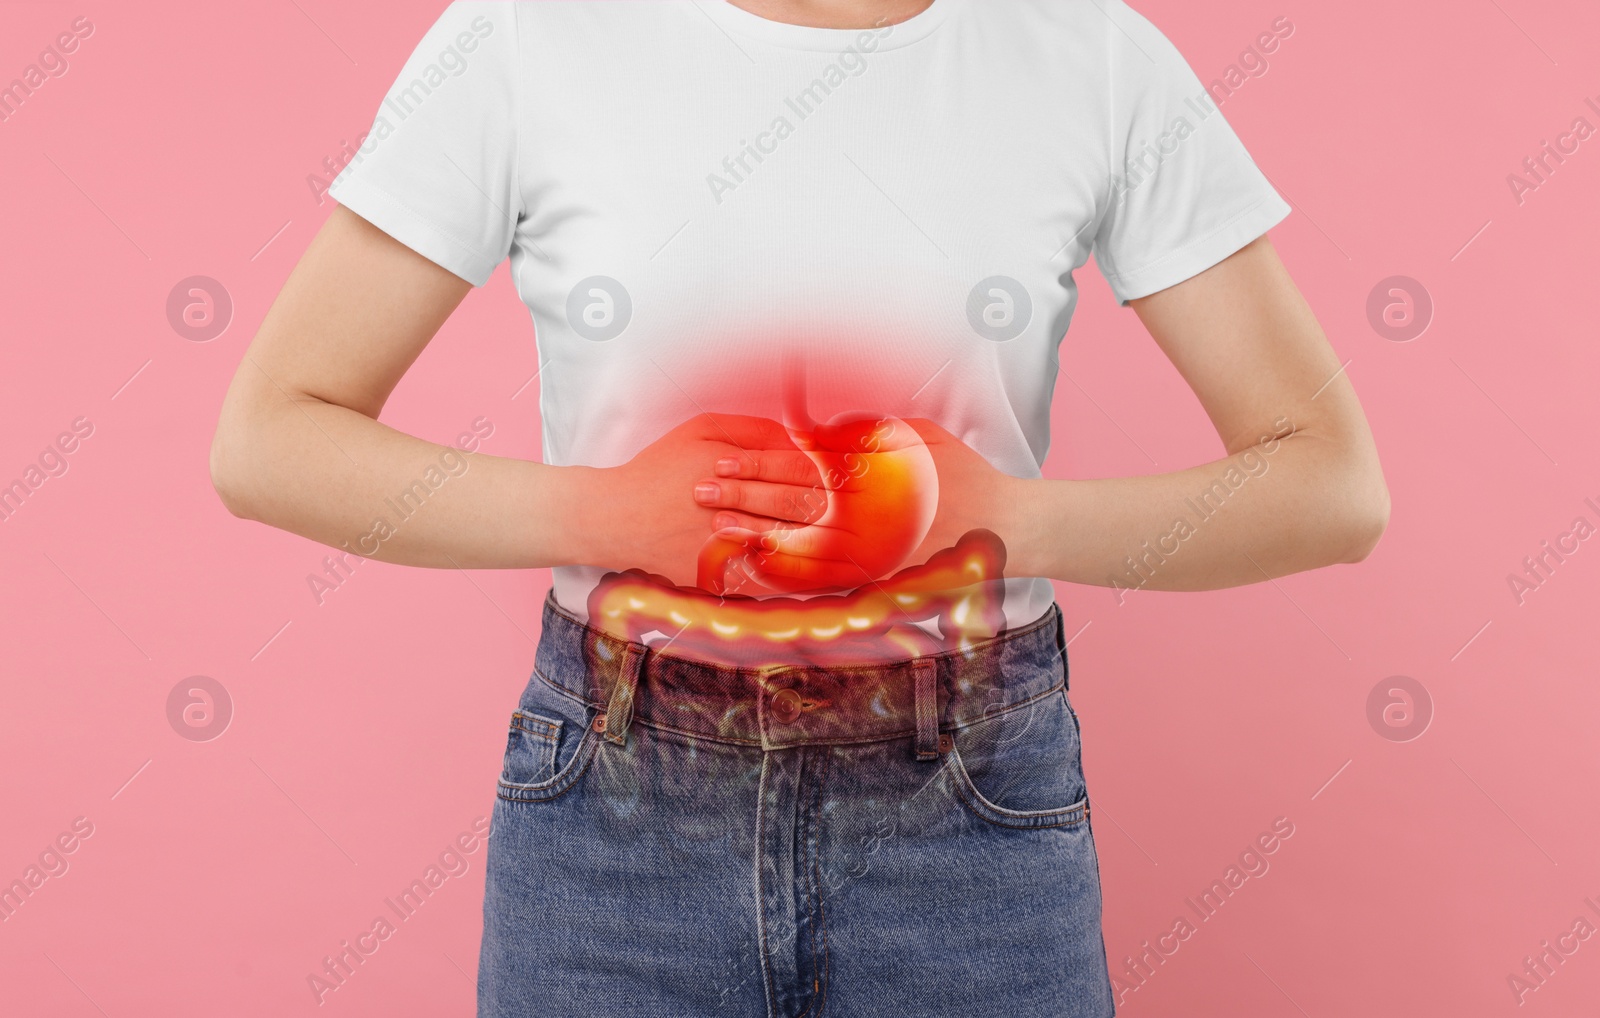 Image of Woman suffering from stomach ache on pink background, closeup. Illustration of unhealthy gastrointestinal tract